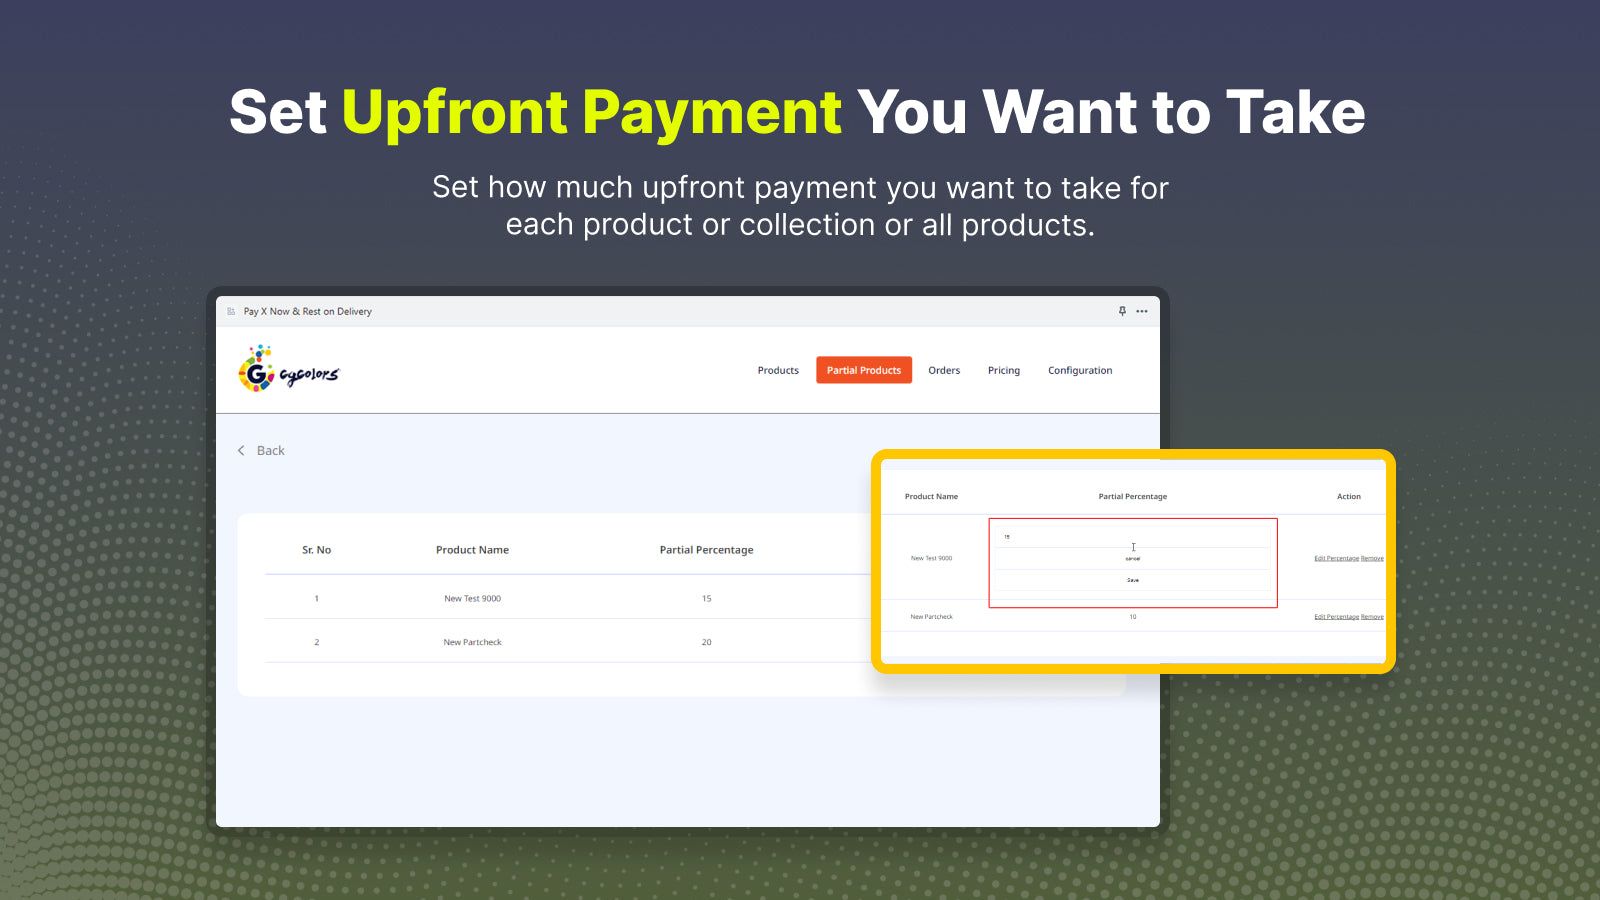 Set Upfront Payment You Want to take